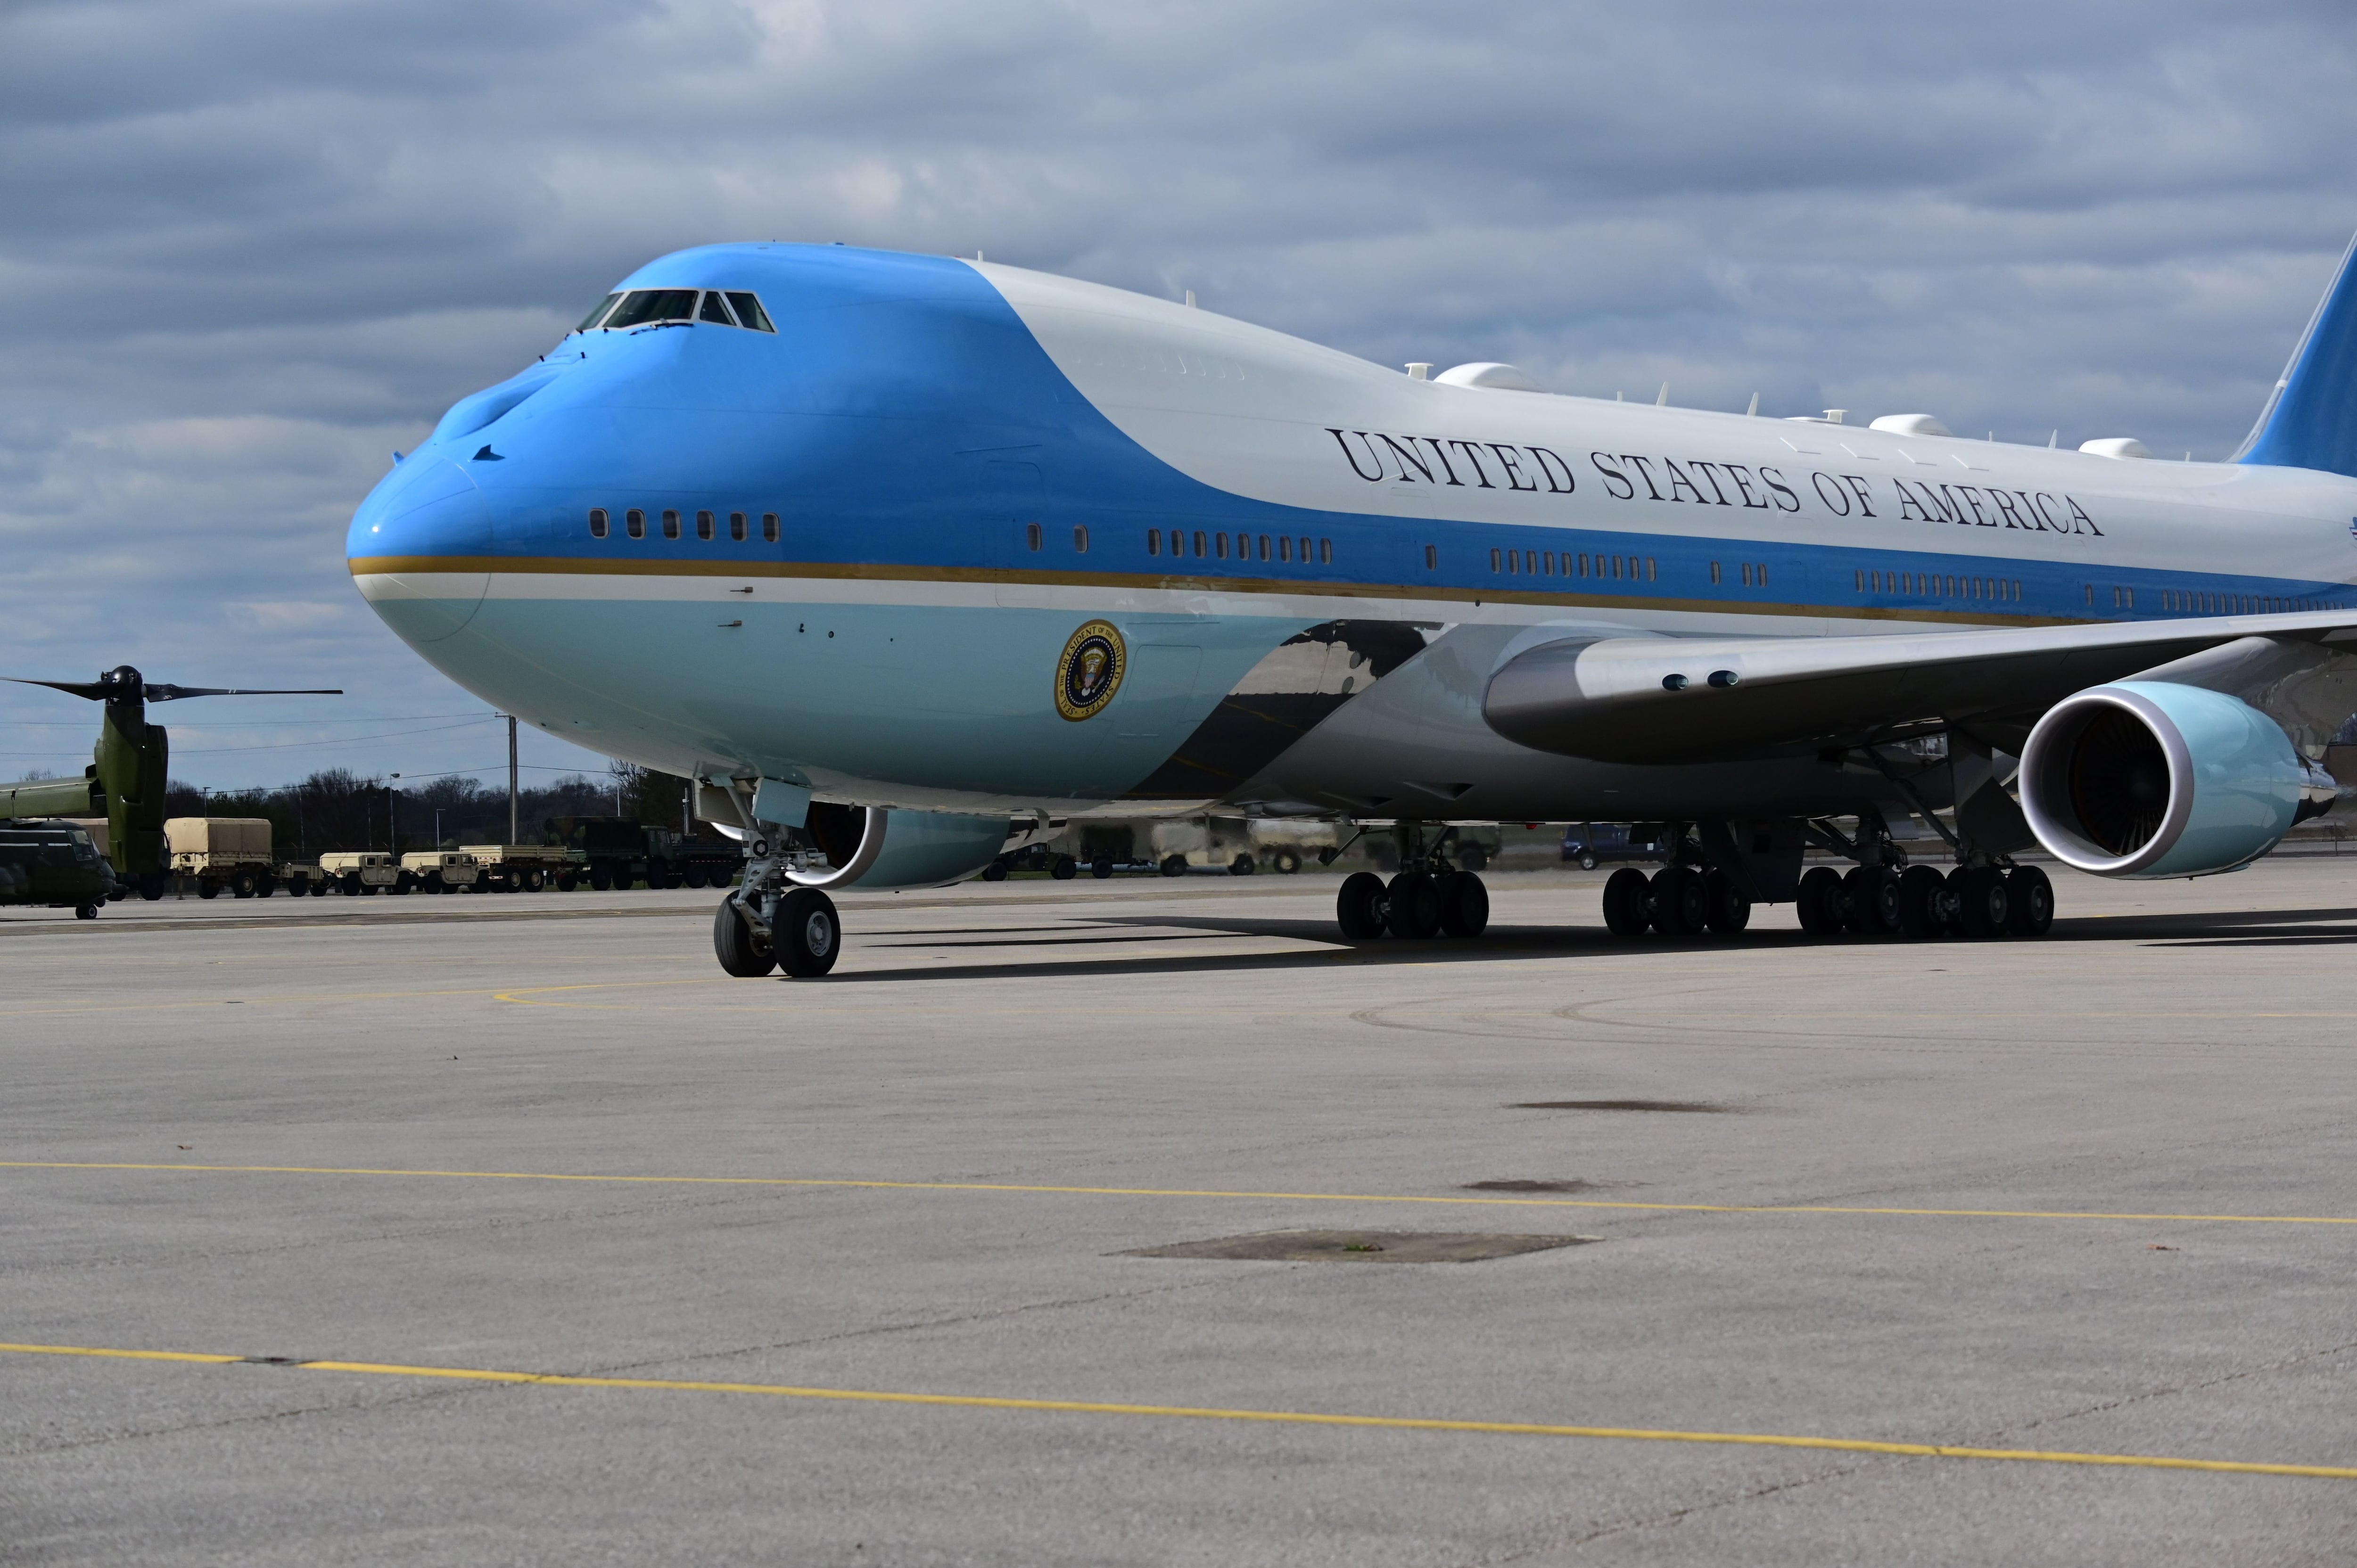 A key milestone of the Air Force One replacement program was